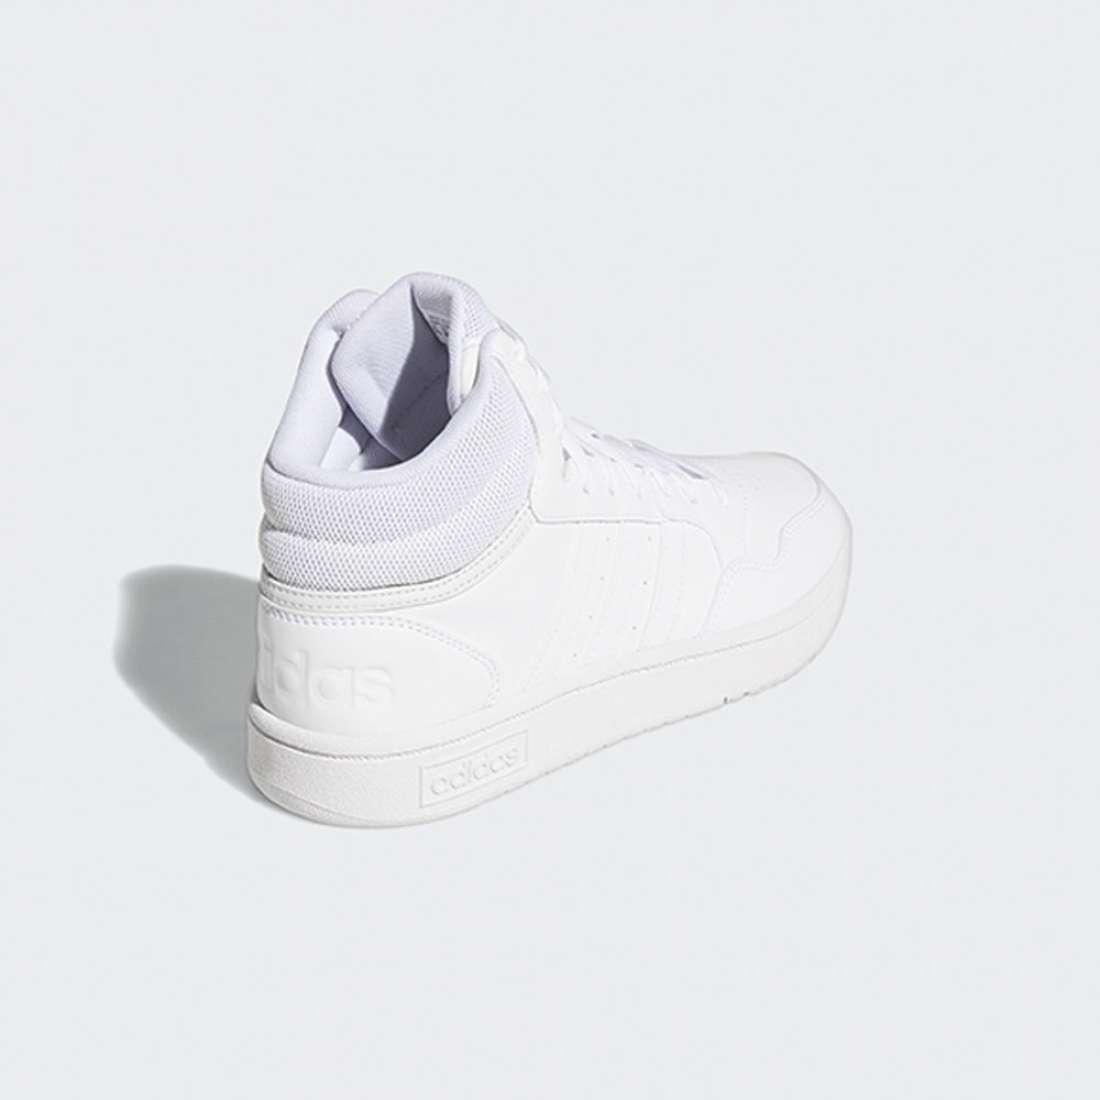 ADIDAS HOOPS 3.0 MID FTWWHT/FTWWHT/DSHGRY